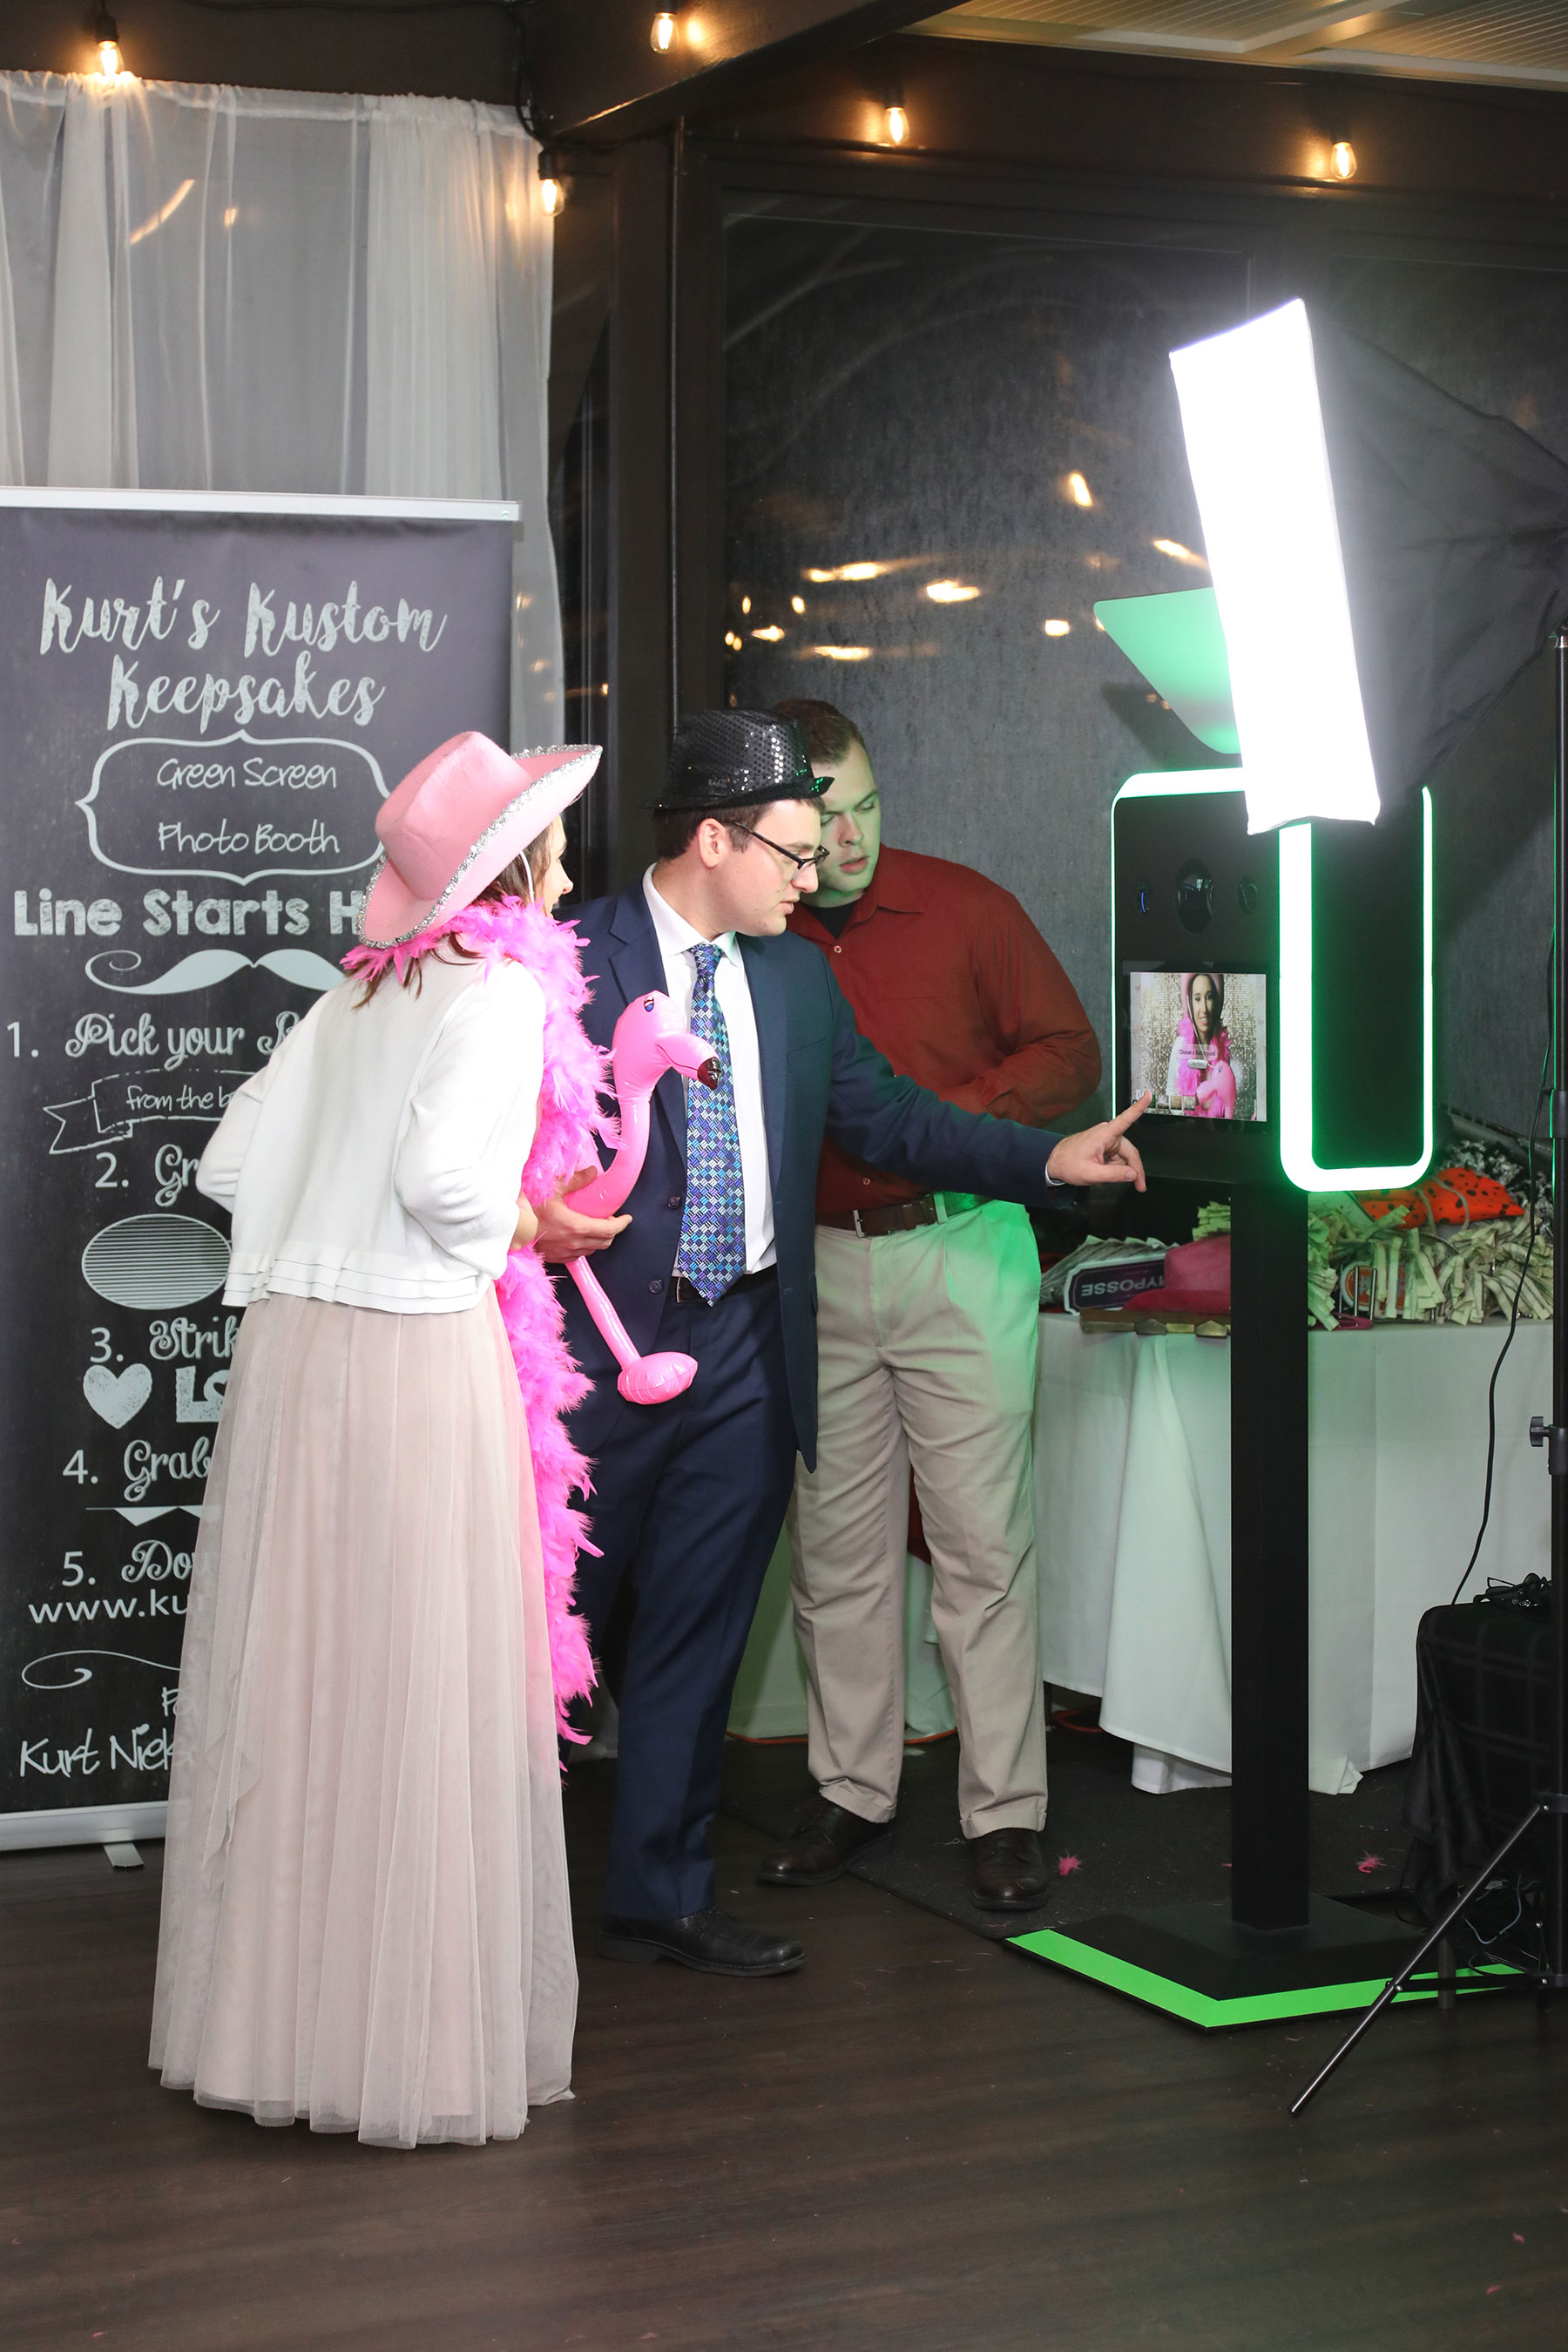 Toledo's best photo booth company traveled to Chagrin Falls for this wedding